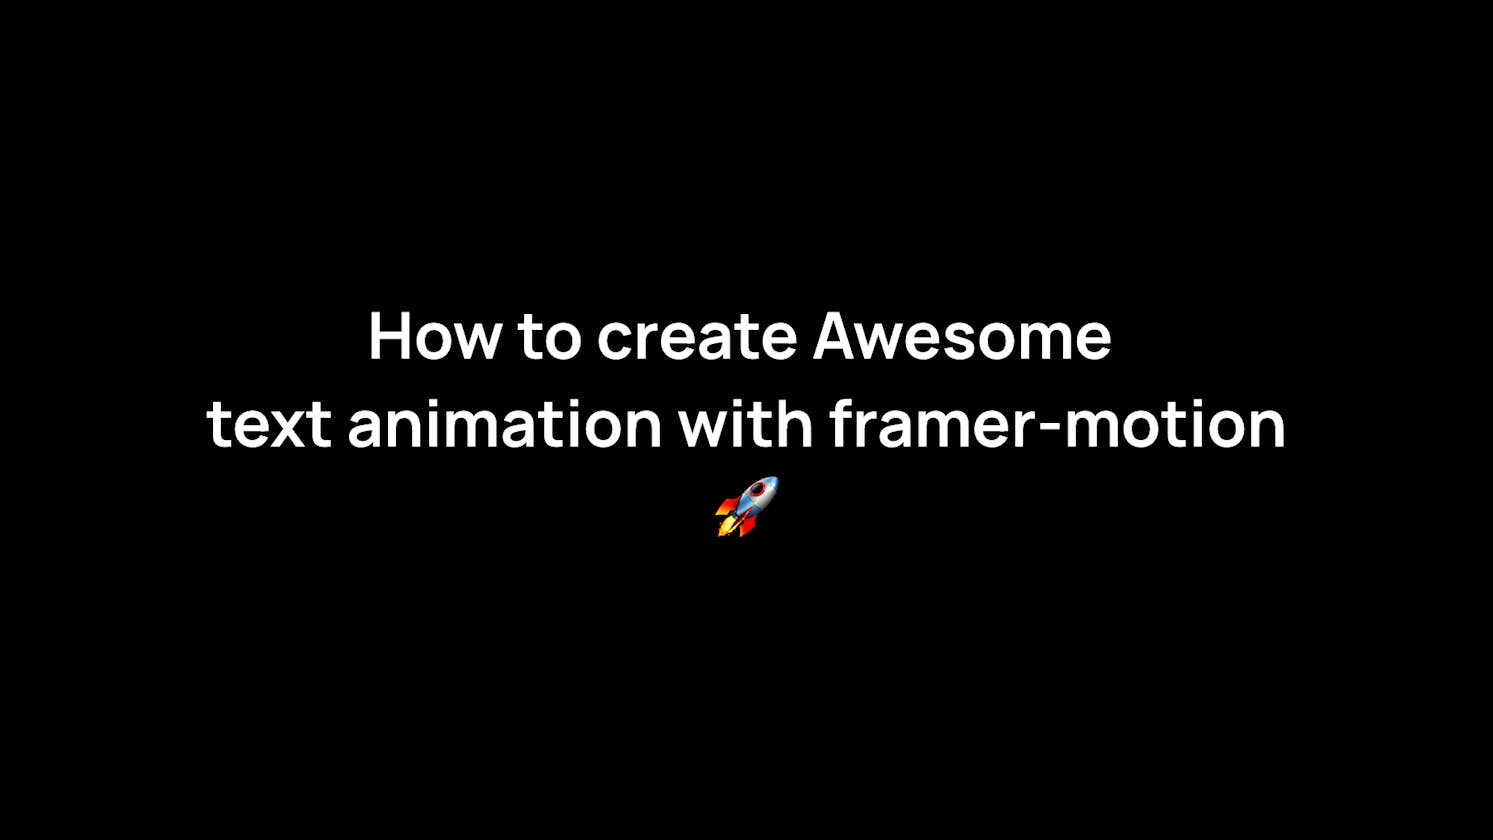 How to create Awesome text animation with framer-motion